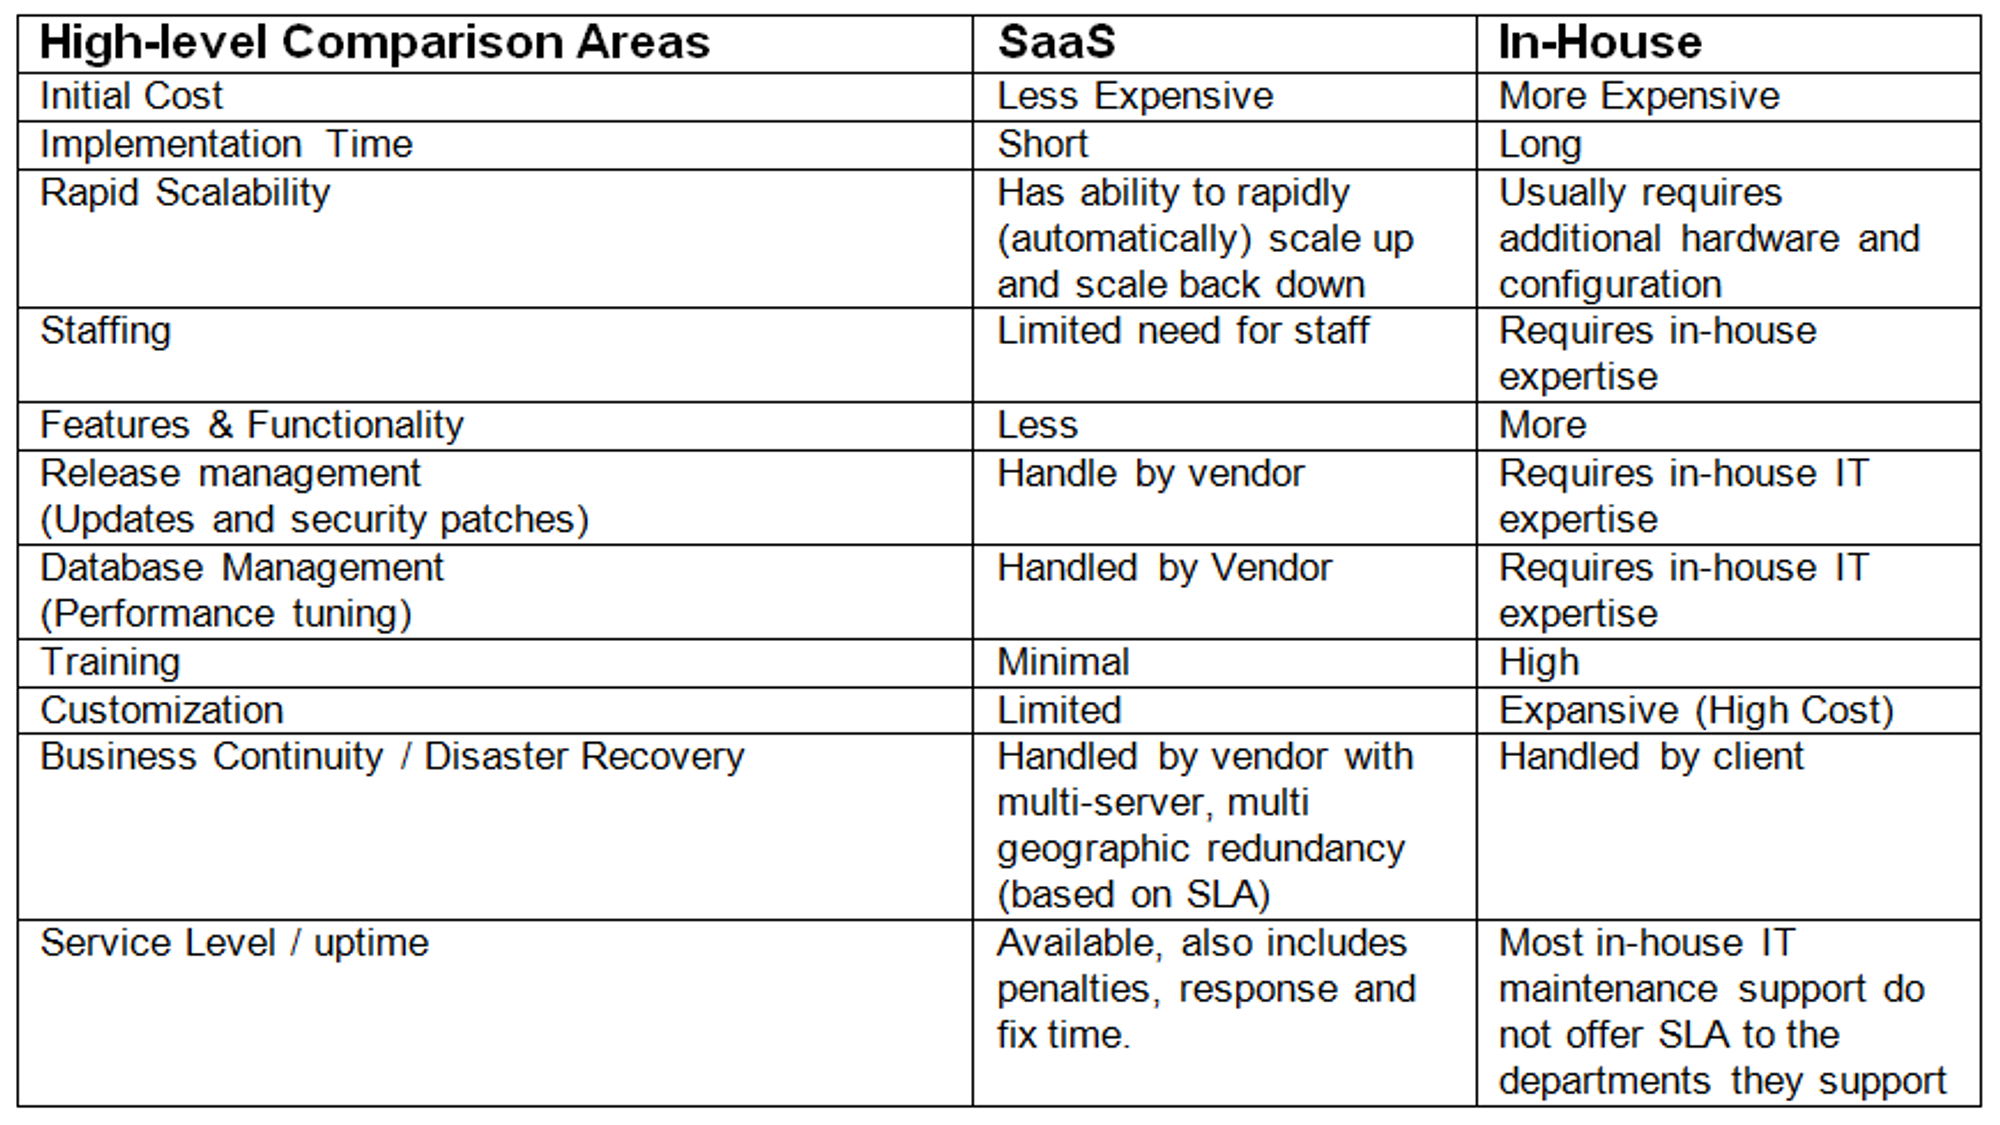 Here's a high-level comparison between SaaS and In-House from a DAM perspective.